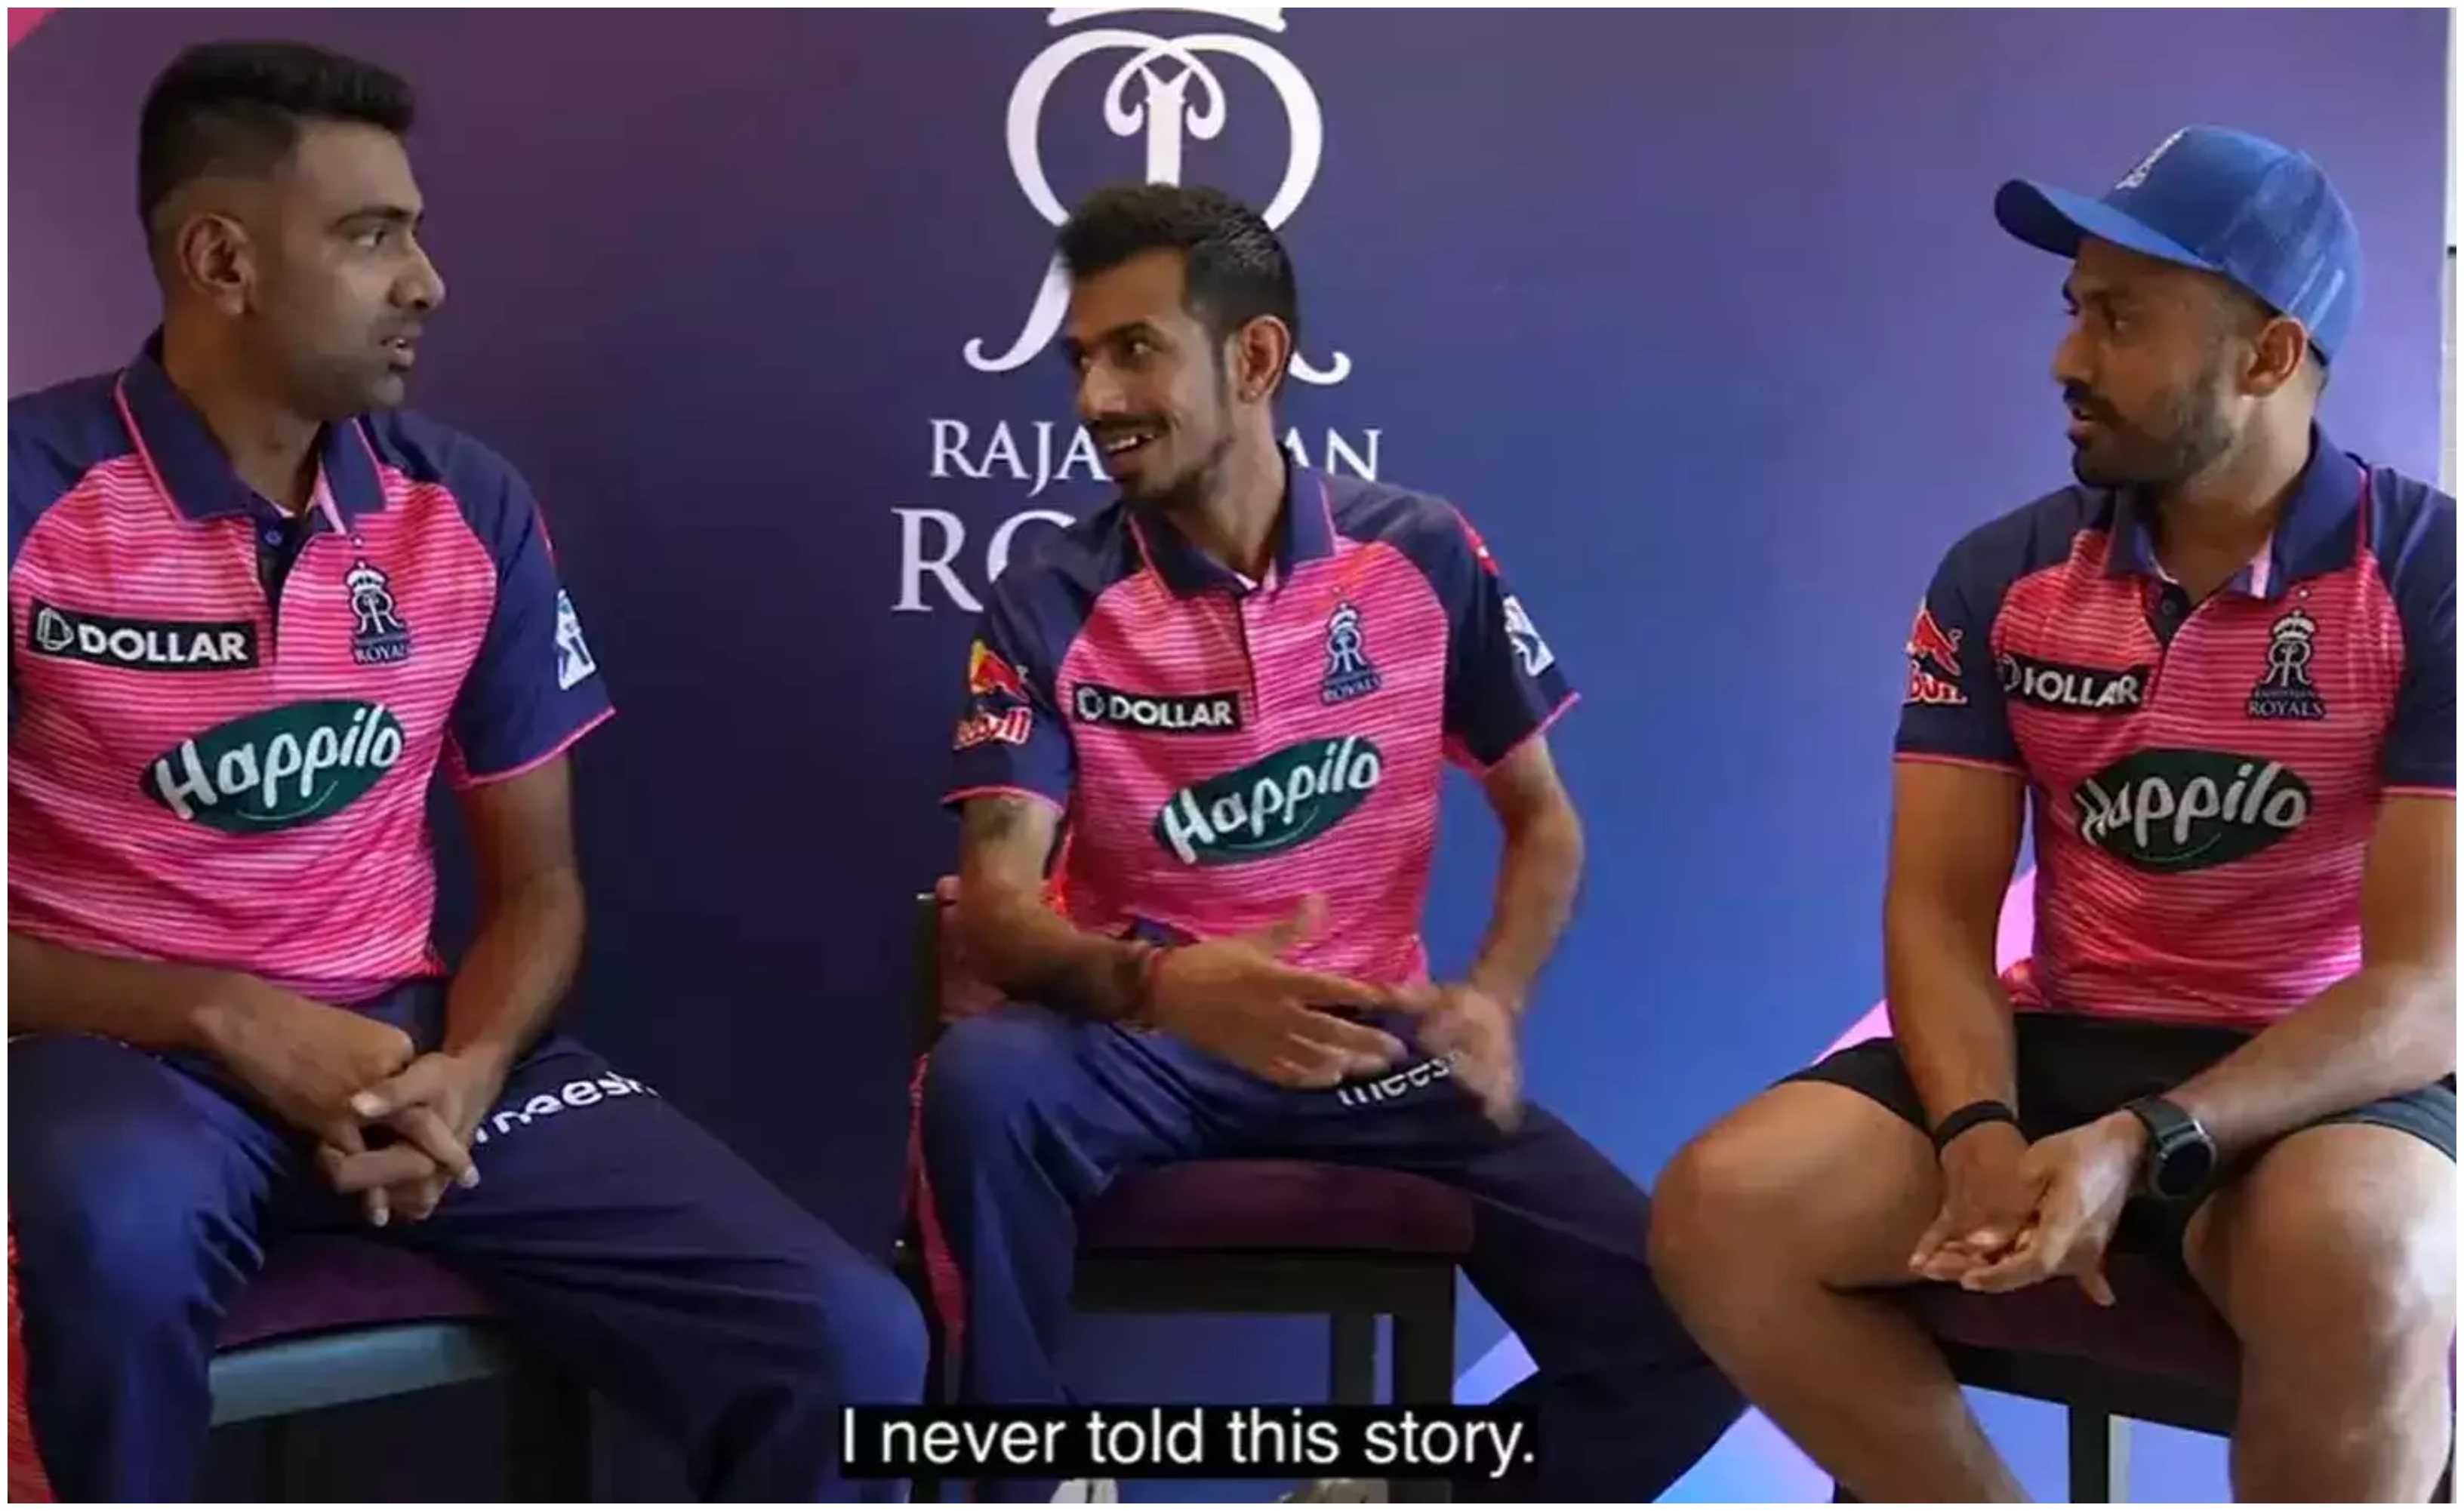 Chahal in conversation with RR teammate Ashwin and Nair | RR/Twitter